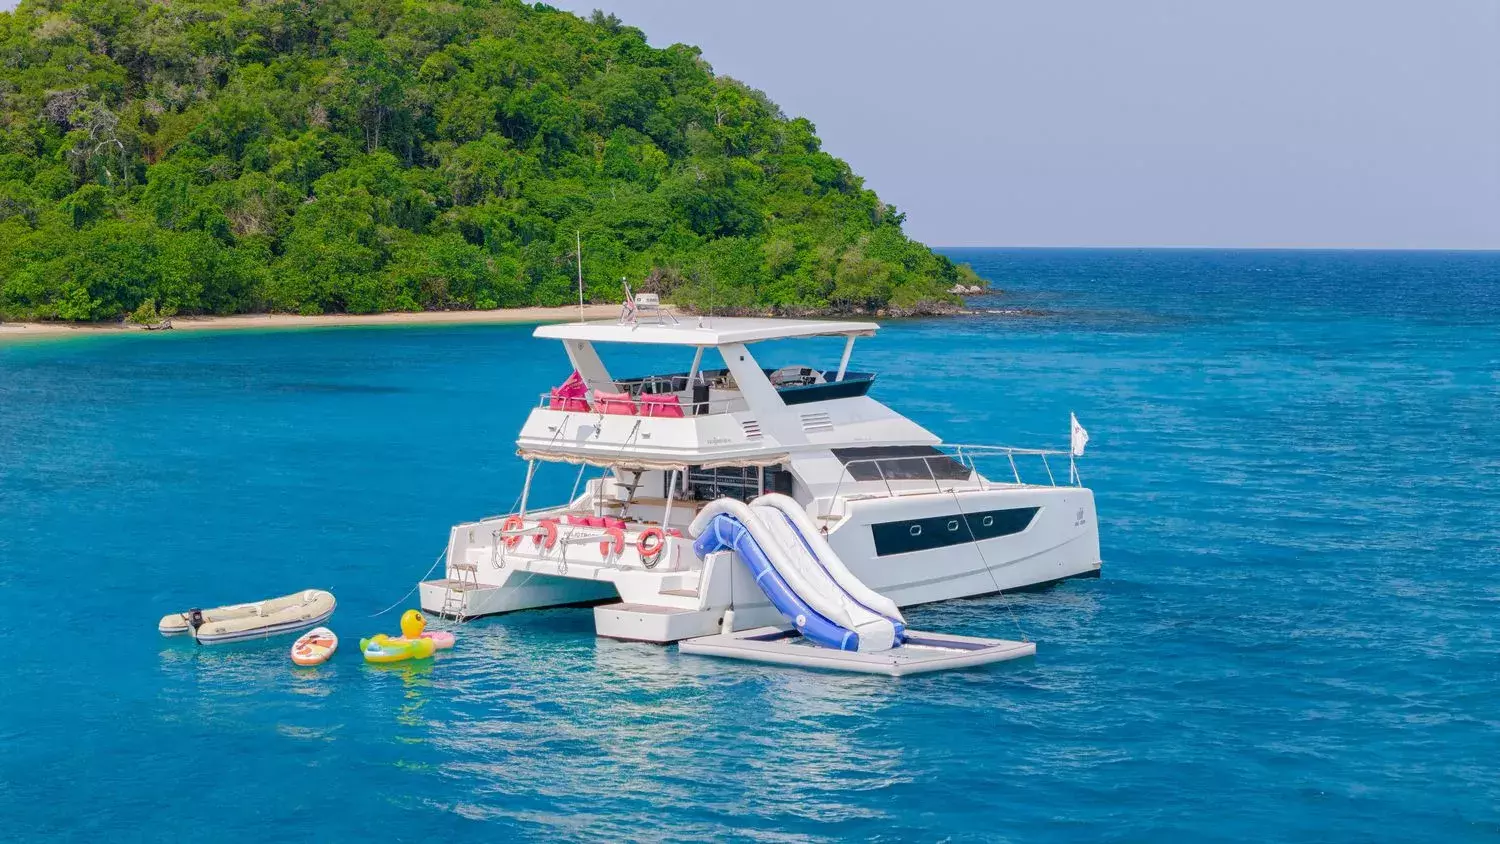 Heliotrope by Bakri Cono - Top rates for a Rental of a private Power Catamaran in Thailand